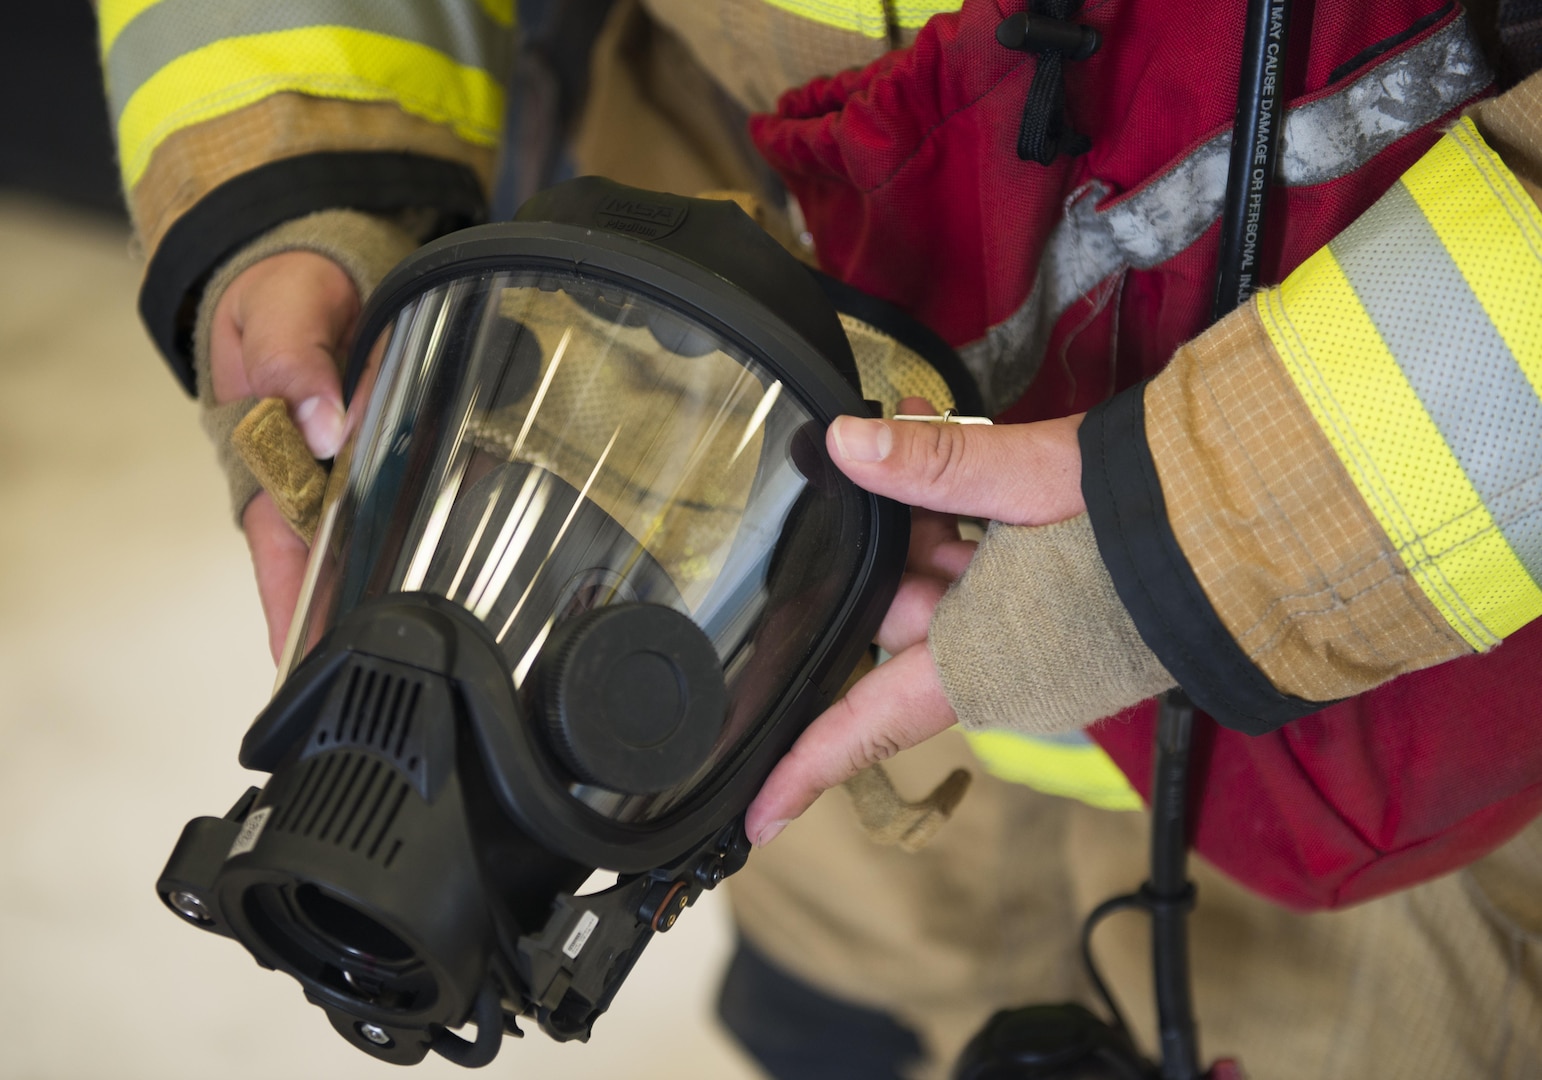 Jeffery Pardo (left), 502nd Civil Engineering Squadron firefighter, shows off his breathing mask to children from Vibrant ABA Solutions during a open house tour of Fire Station 2 June 23, 2017, at Joint Base San Antonio-Lackland, Texas. (U.S. Air Force photo by Senior Airman Krystal Wright)